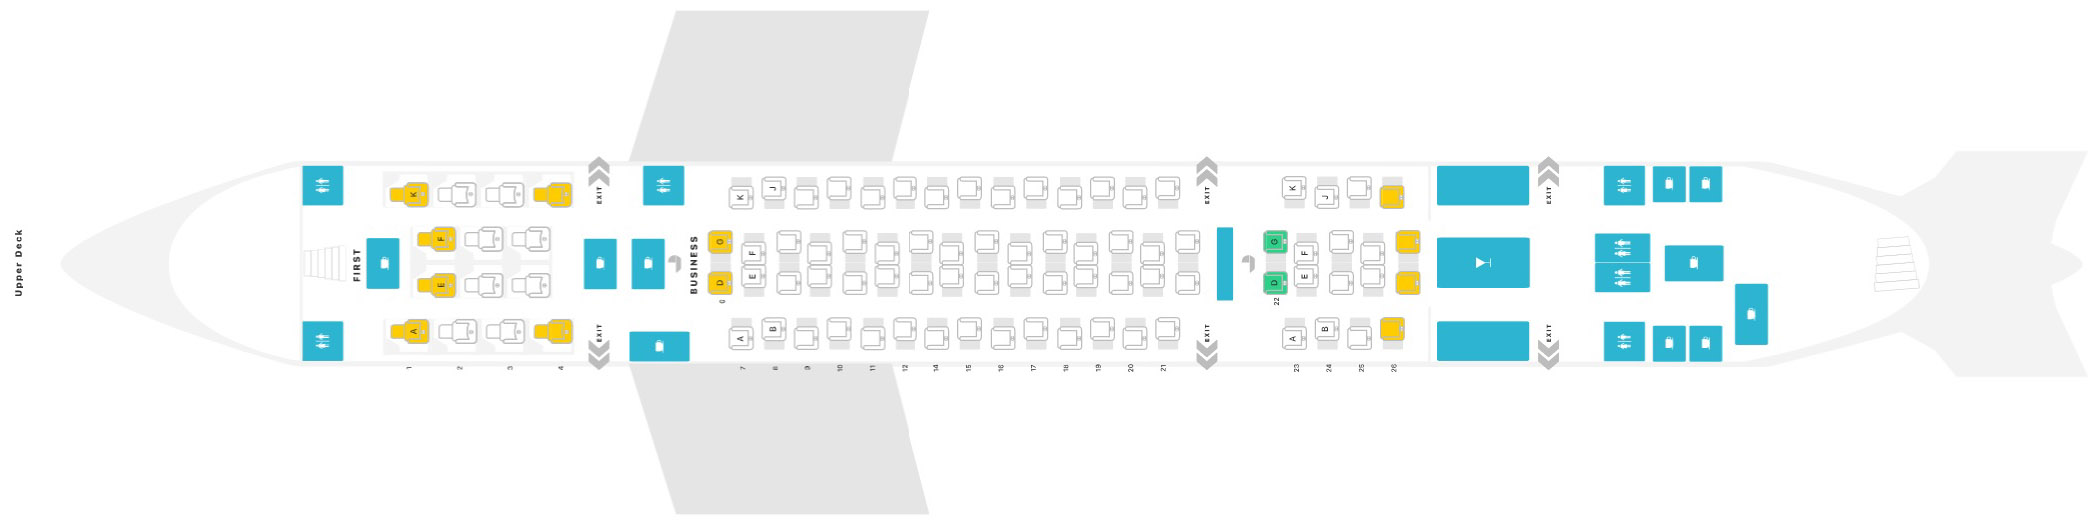 Emirates Airbus A380-800 Three Class Layout 1 Upper Deck